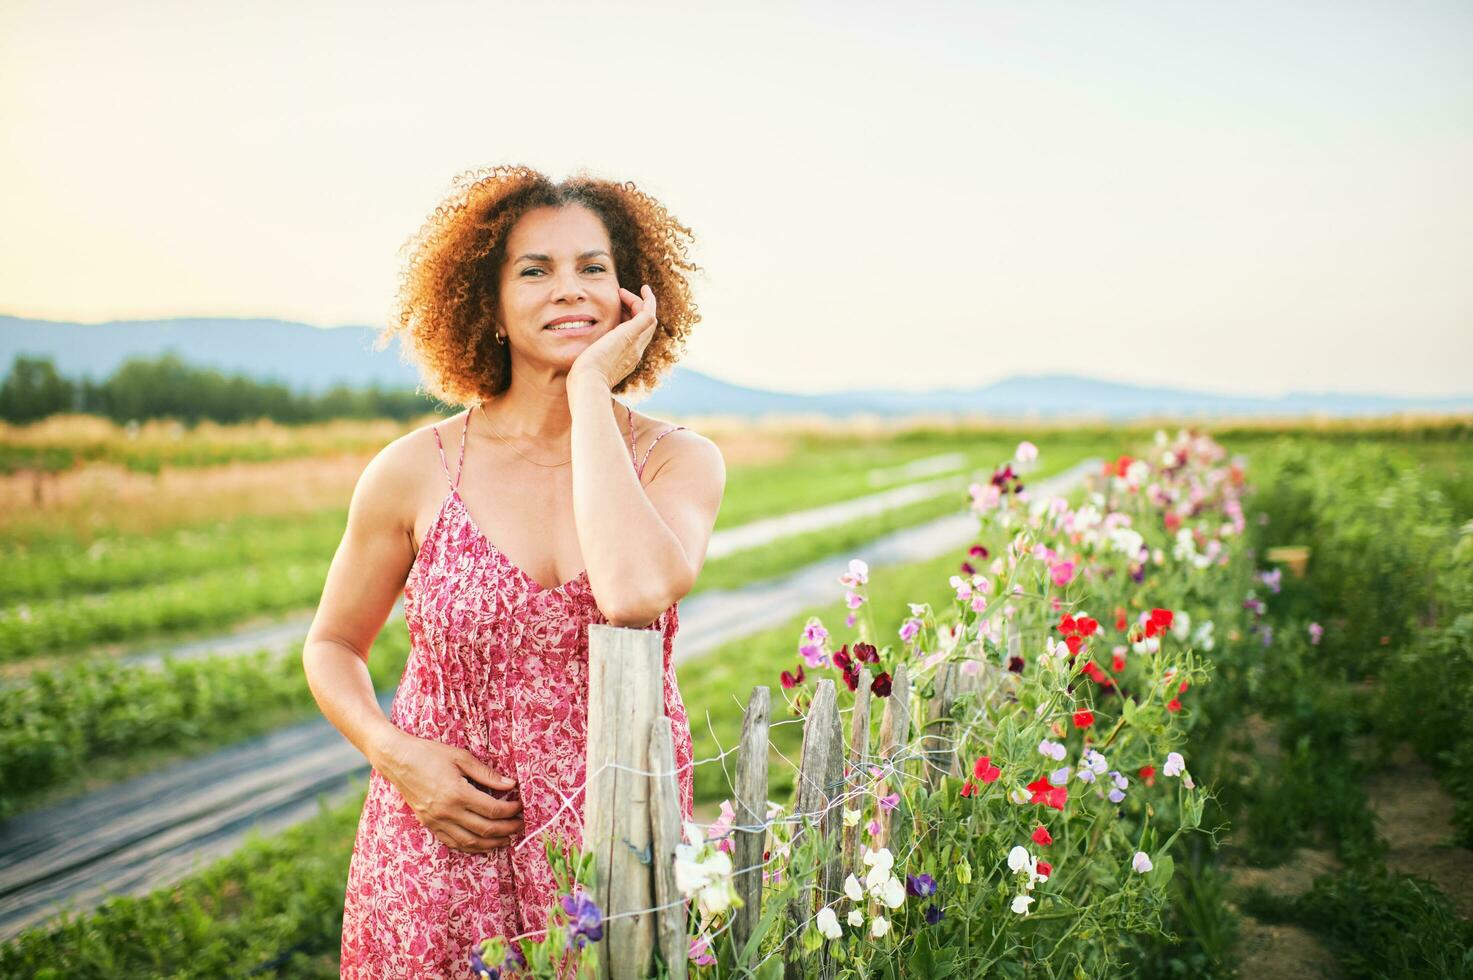 Outdoor portrait of beautiful middle age woman enjoying nice suuny evening in countryside, leaning on flower fence, wearing red dress photo